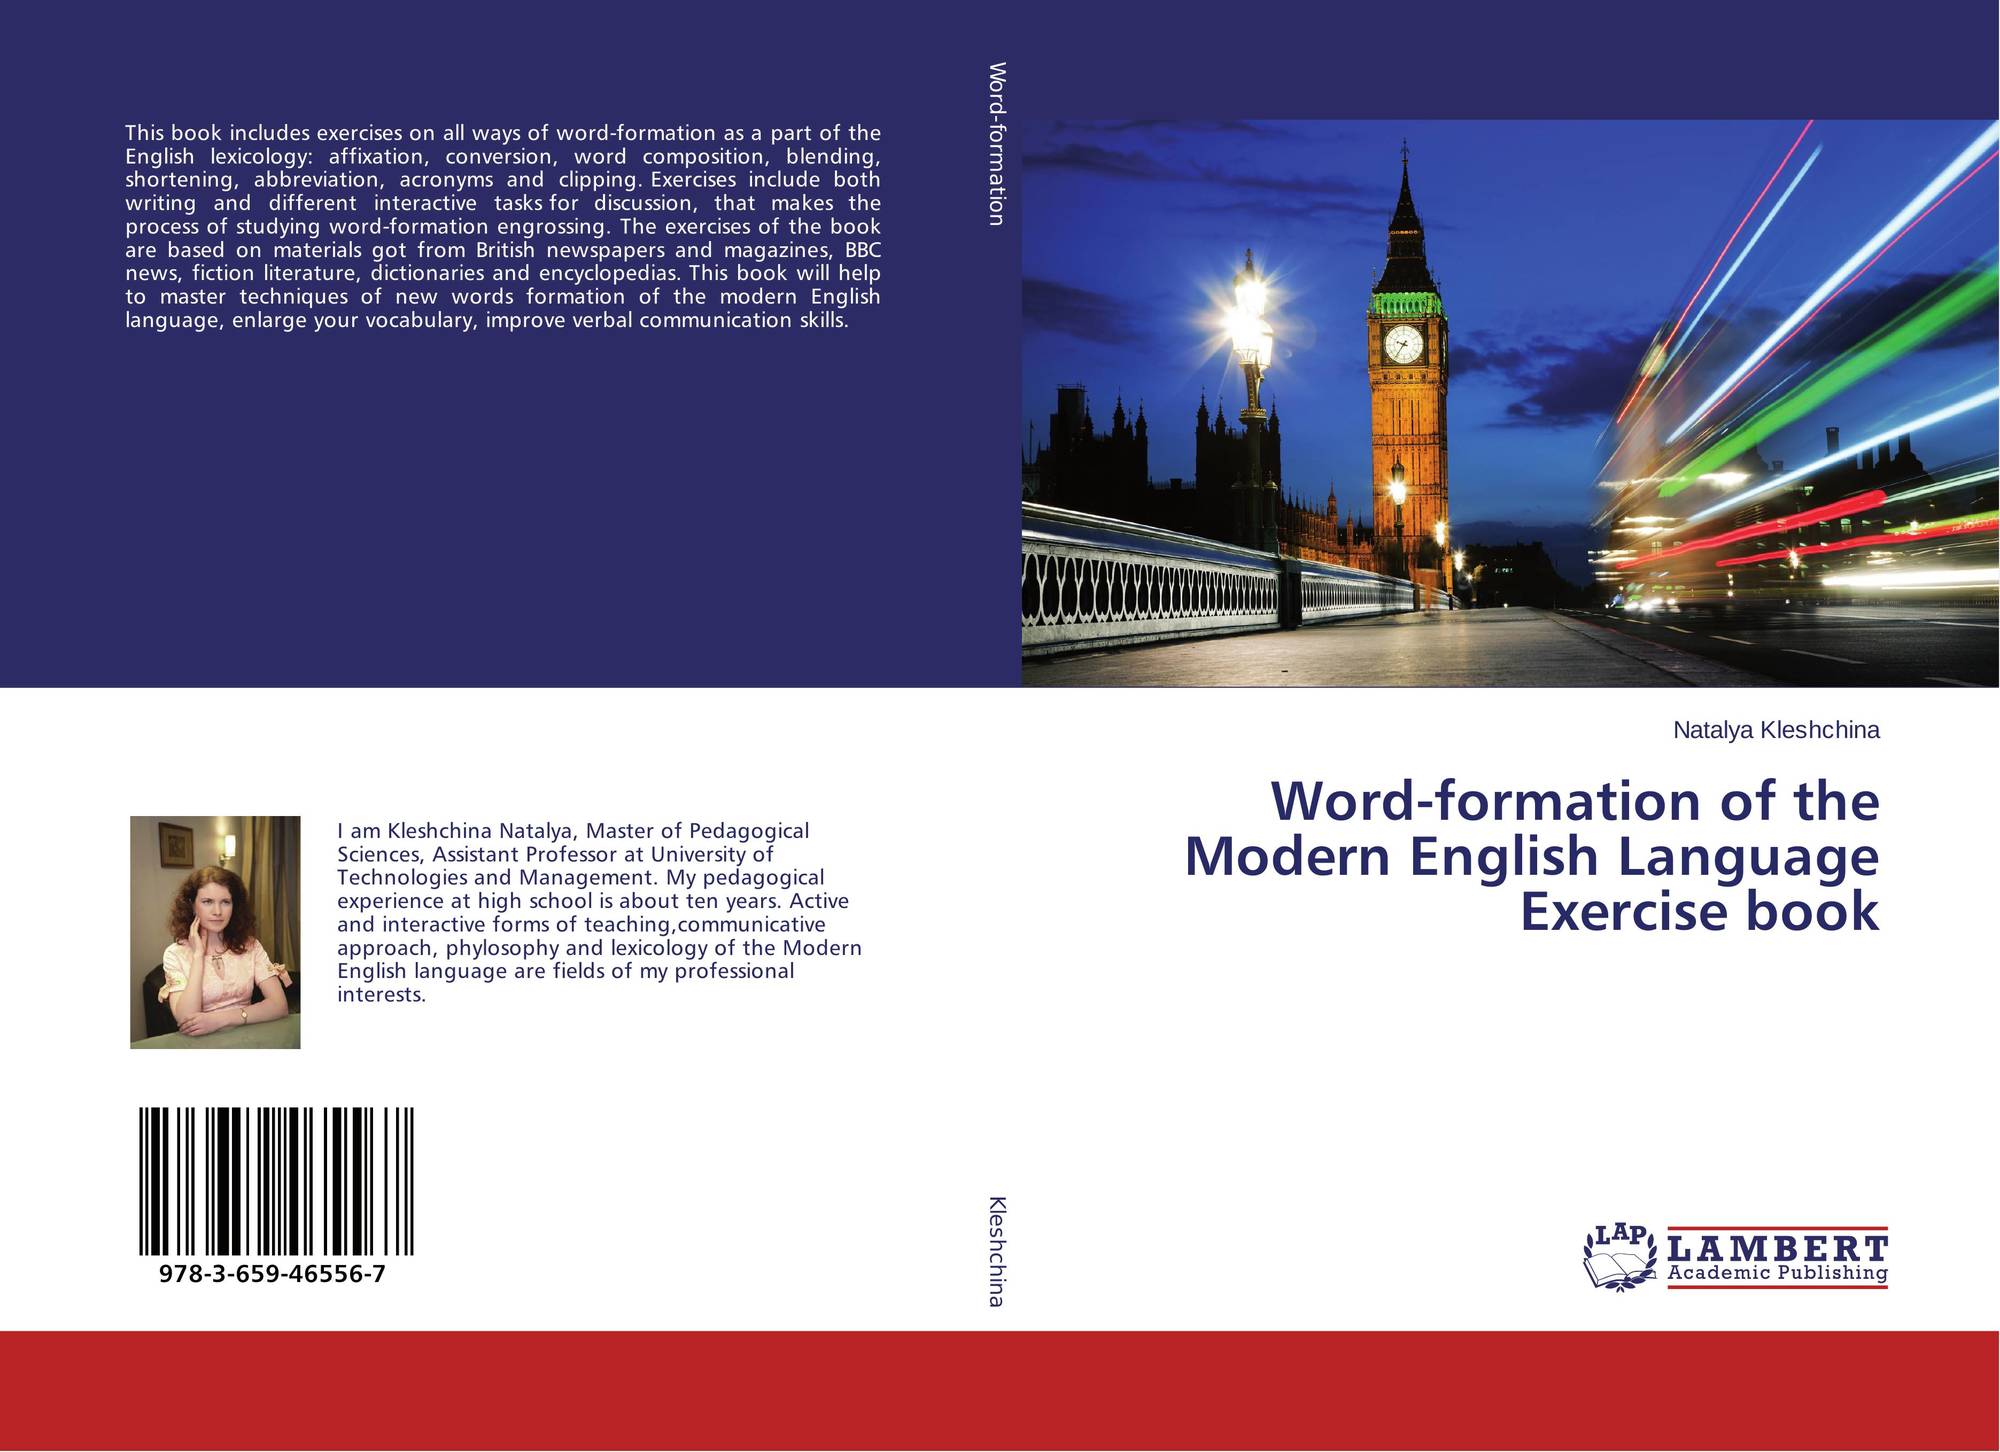 Word-formation of the Modern English Language Exercise book, 978-3-659